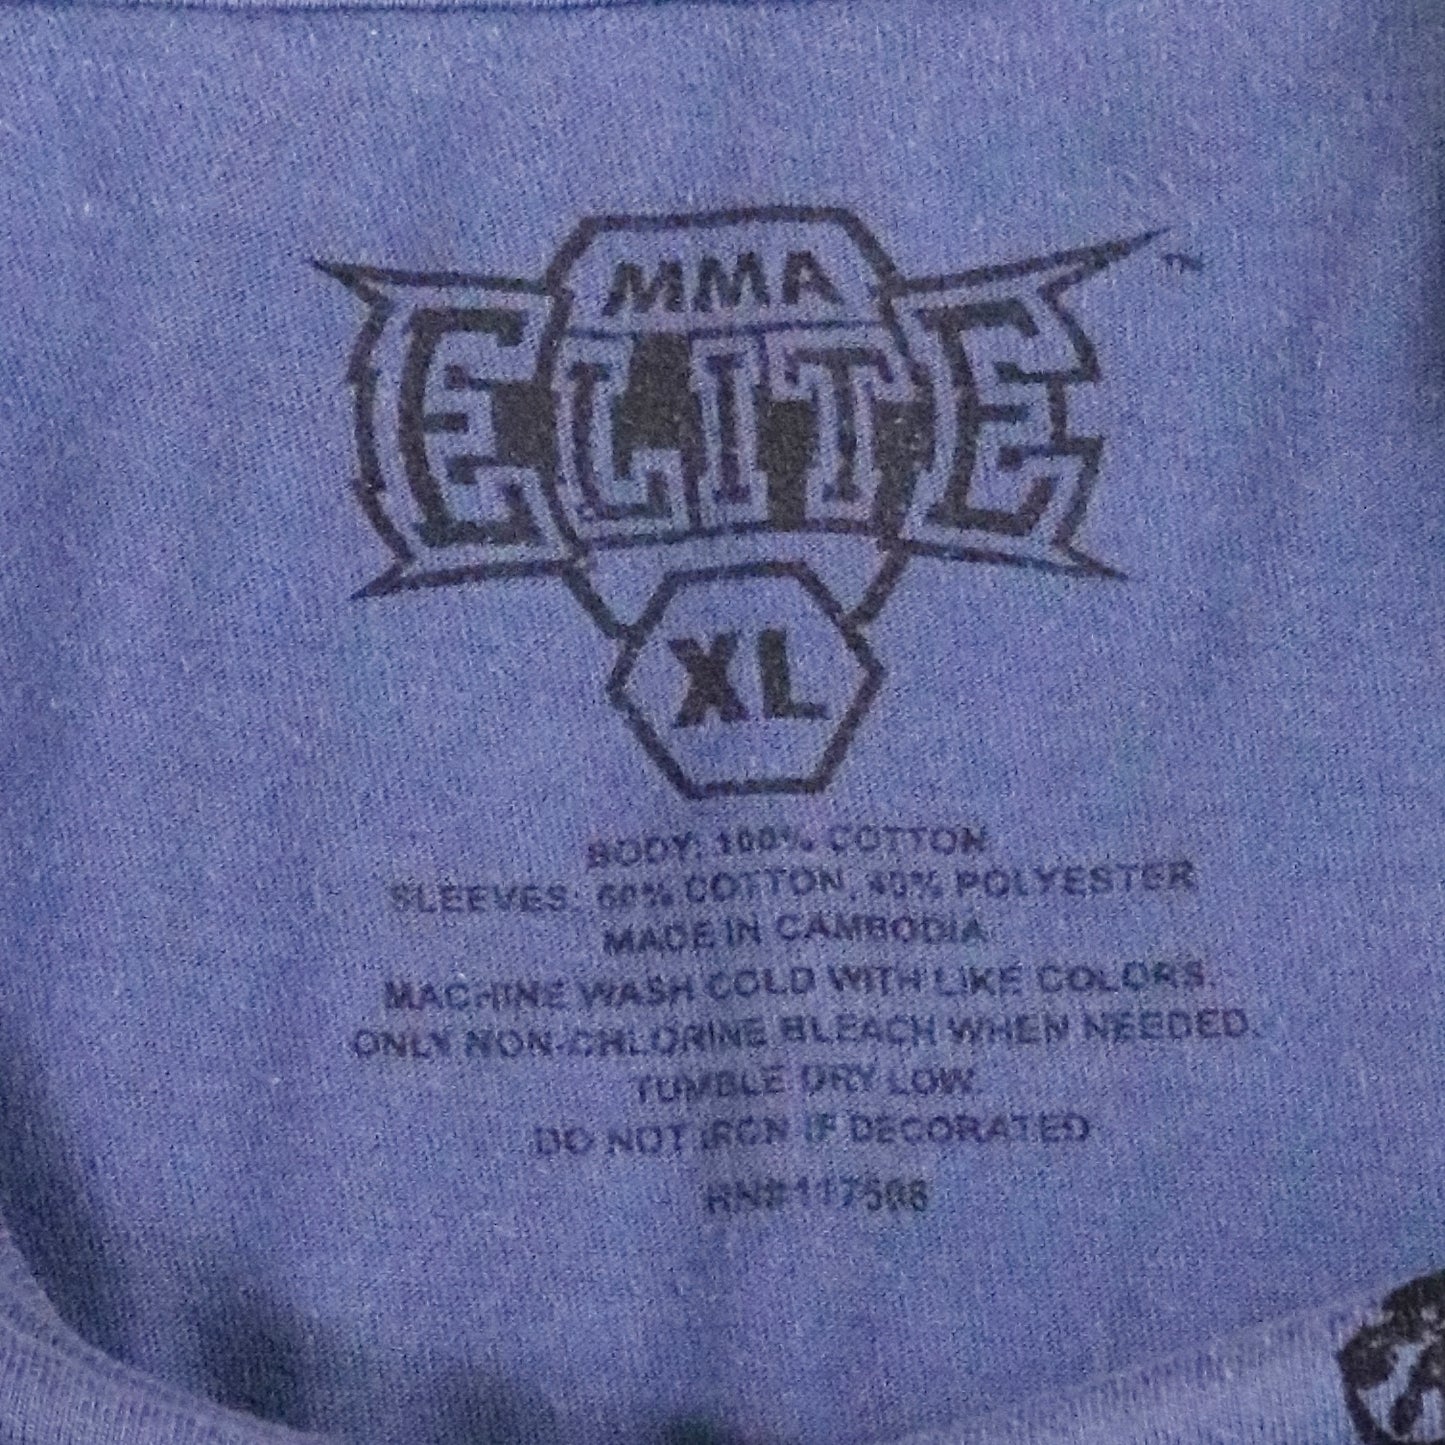 "MMA ELITE" Switching thermal knit t-shirt